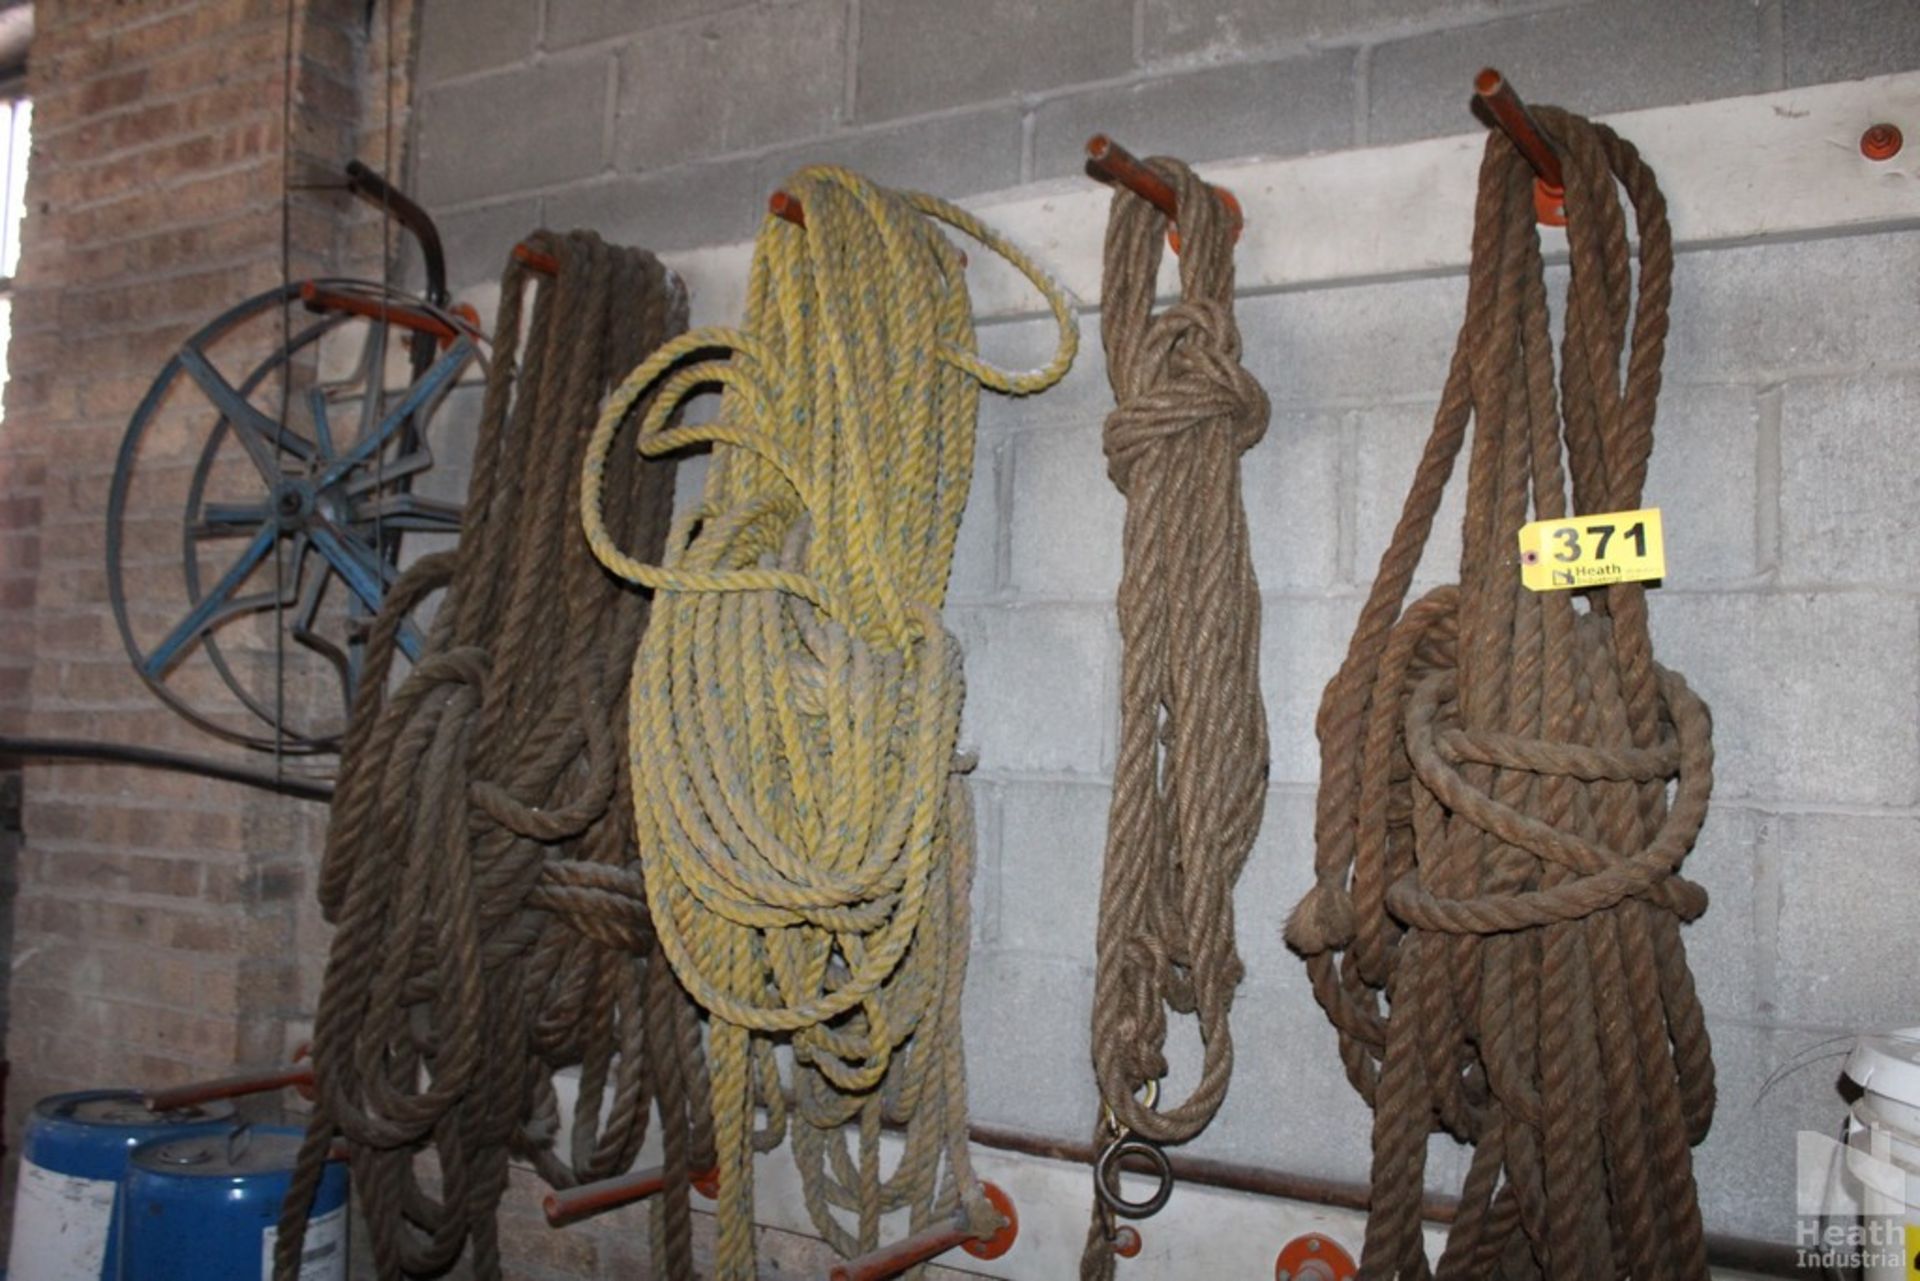 (4) LARGE ROPES ON WALL